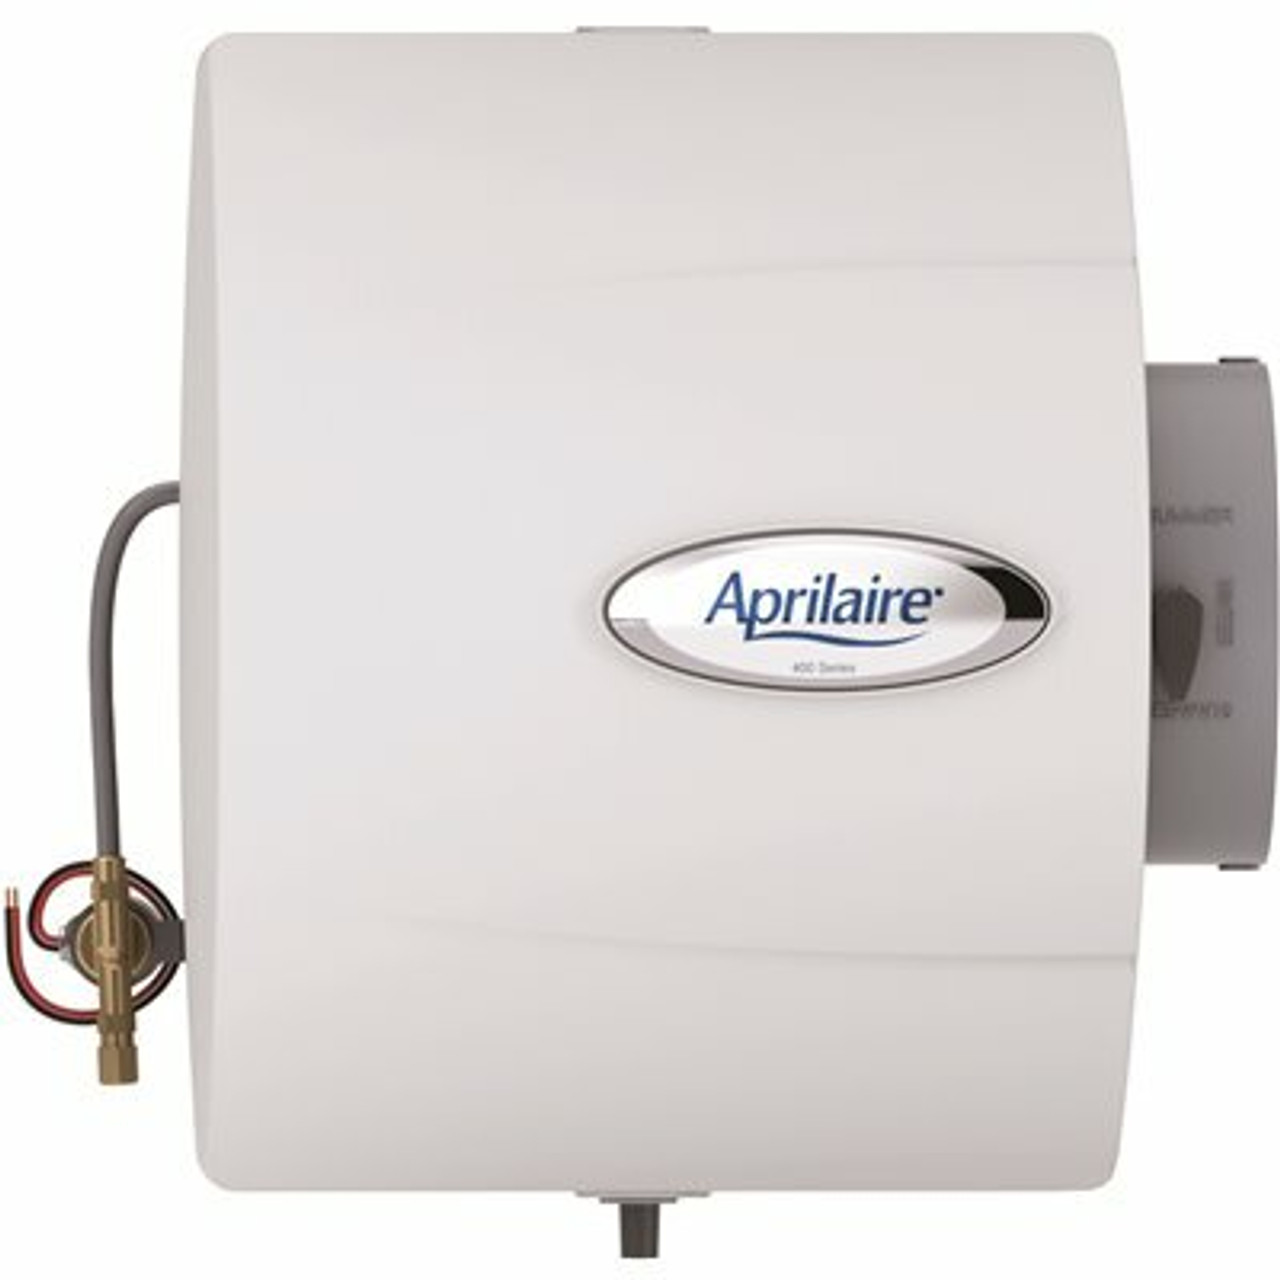 Aprilaire Manual Bypass Evaporative Humidifier - 312148211